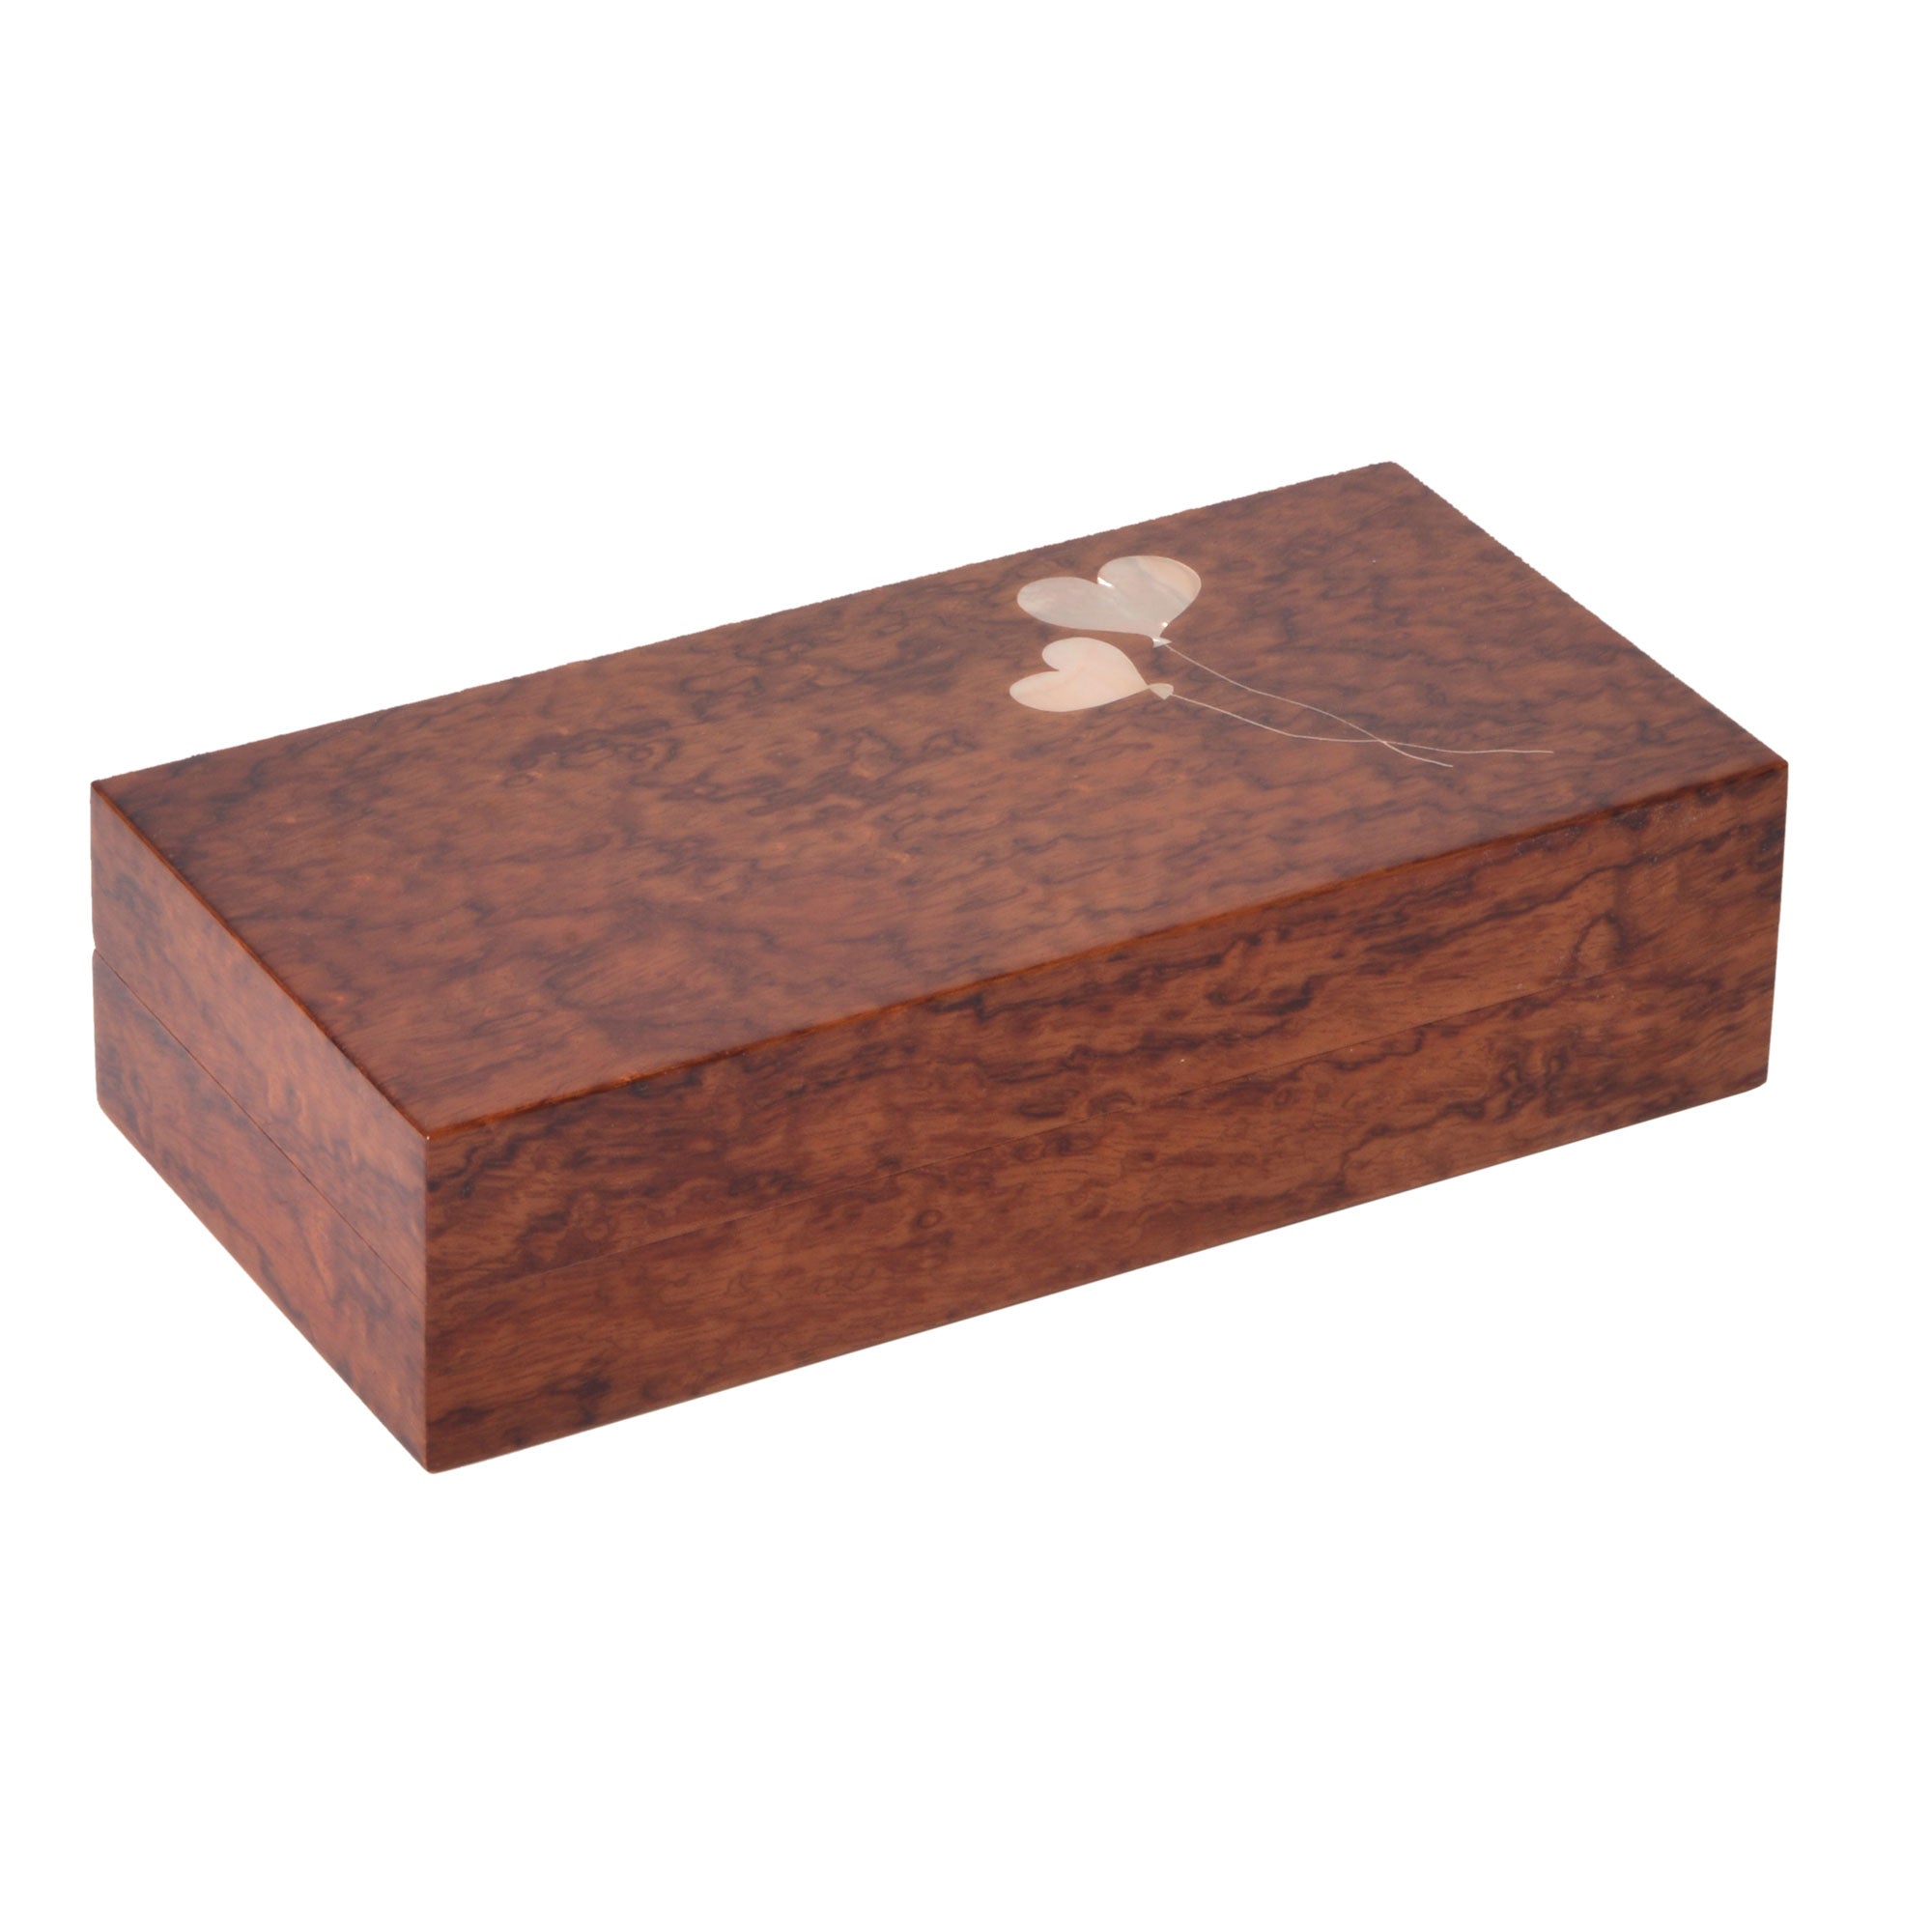 "Classic" - Box for 8 rings or 8 pairs of cufflinks